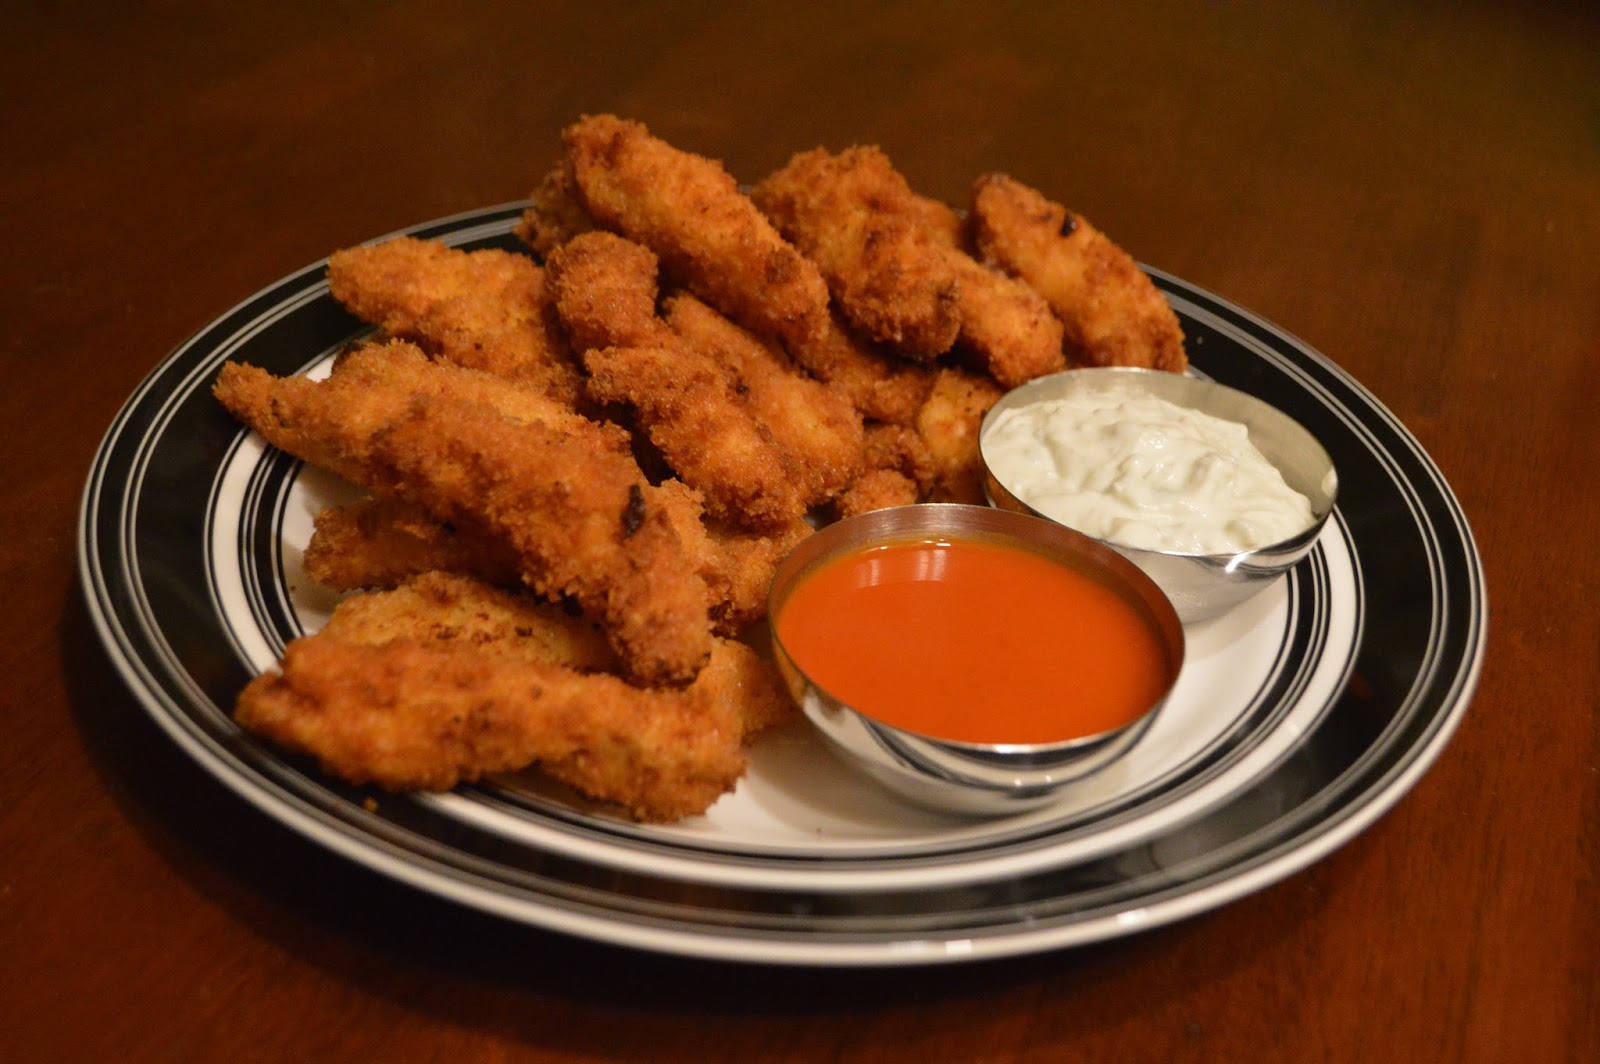 Buffalo Chicken Dippers - Taste of Home